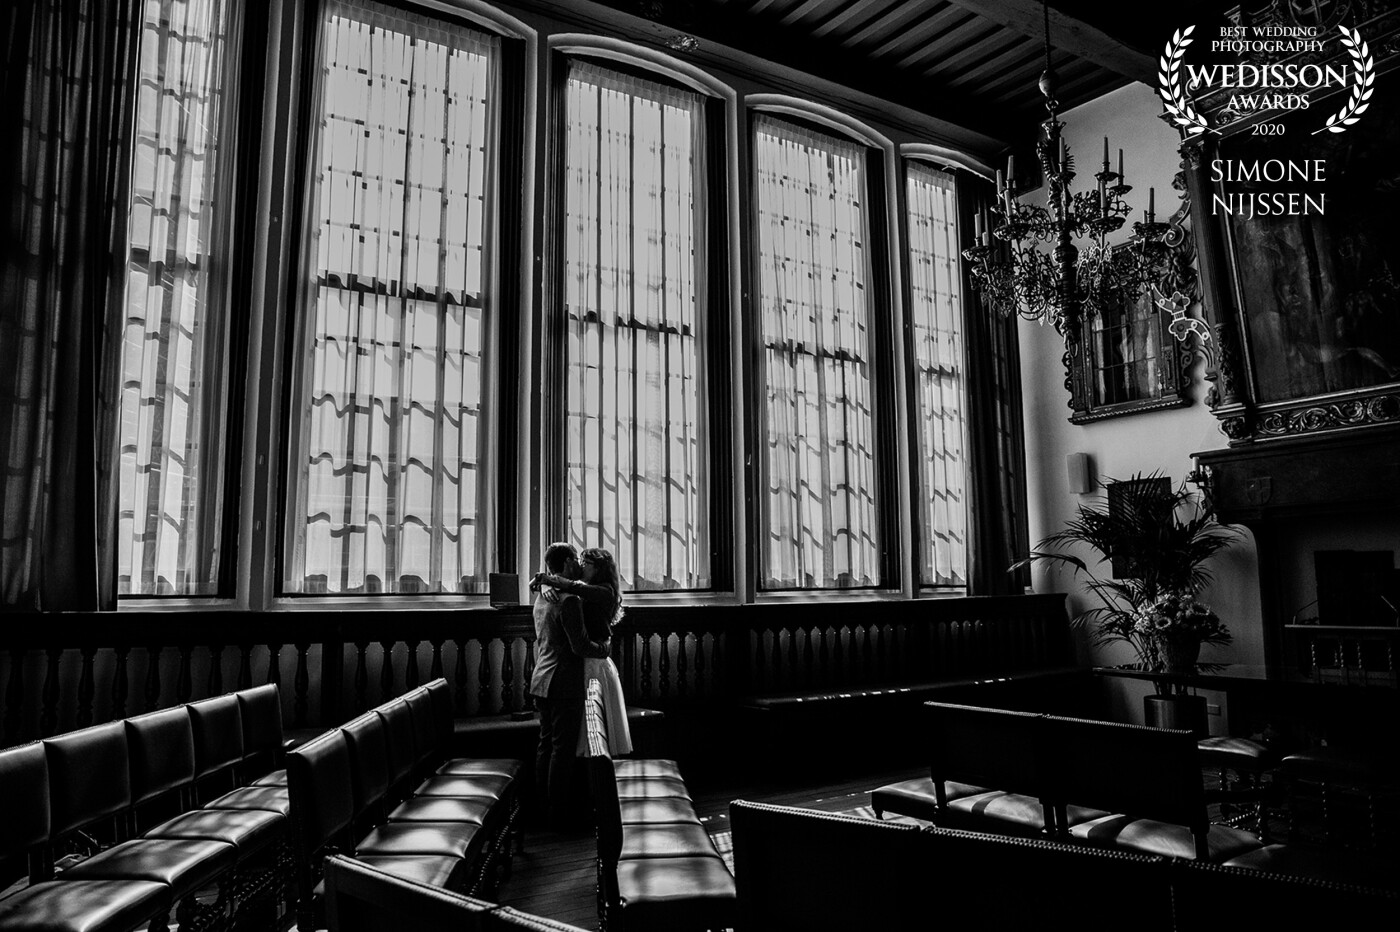 This was one of my most fun weddings in 2019. Very proud of this picture, made in one of the oldest and most beautiful rooms to get married in the city of Zwolle in The Netherlands. The bride and groom were hugging after the ceremony and didn't notice that I was still there to catch this beautiful moment between the two of them. 